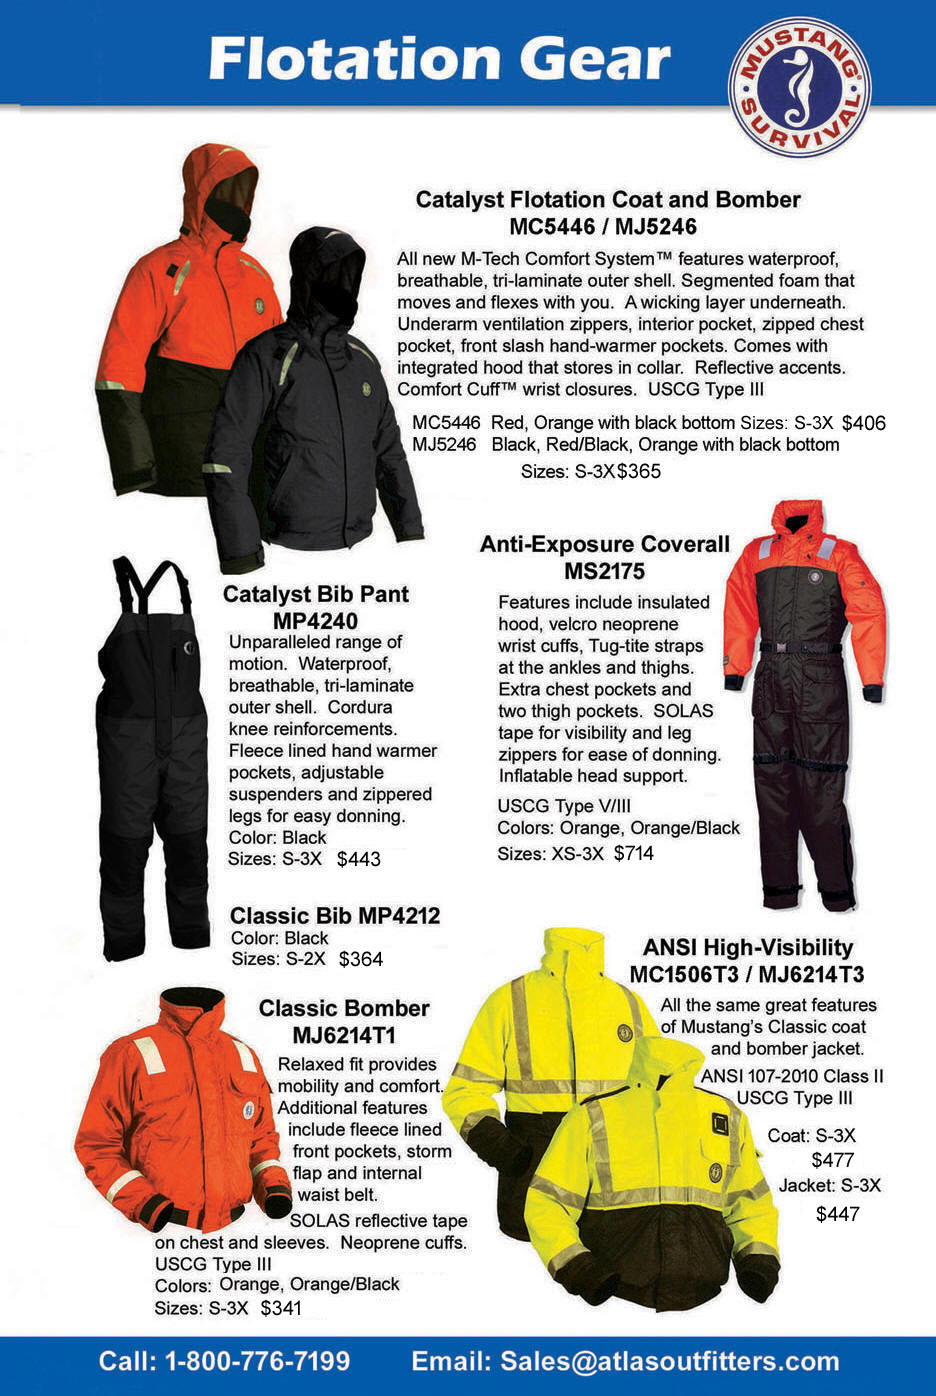 Mustang Survival Flotation coats, jackets, bibs and worksuits